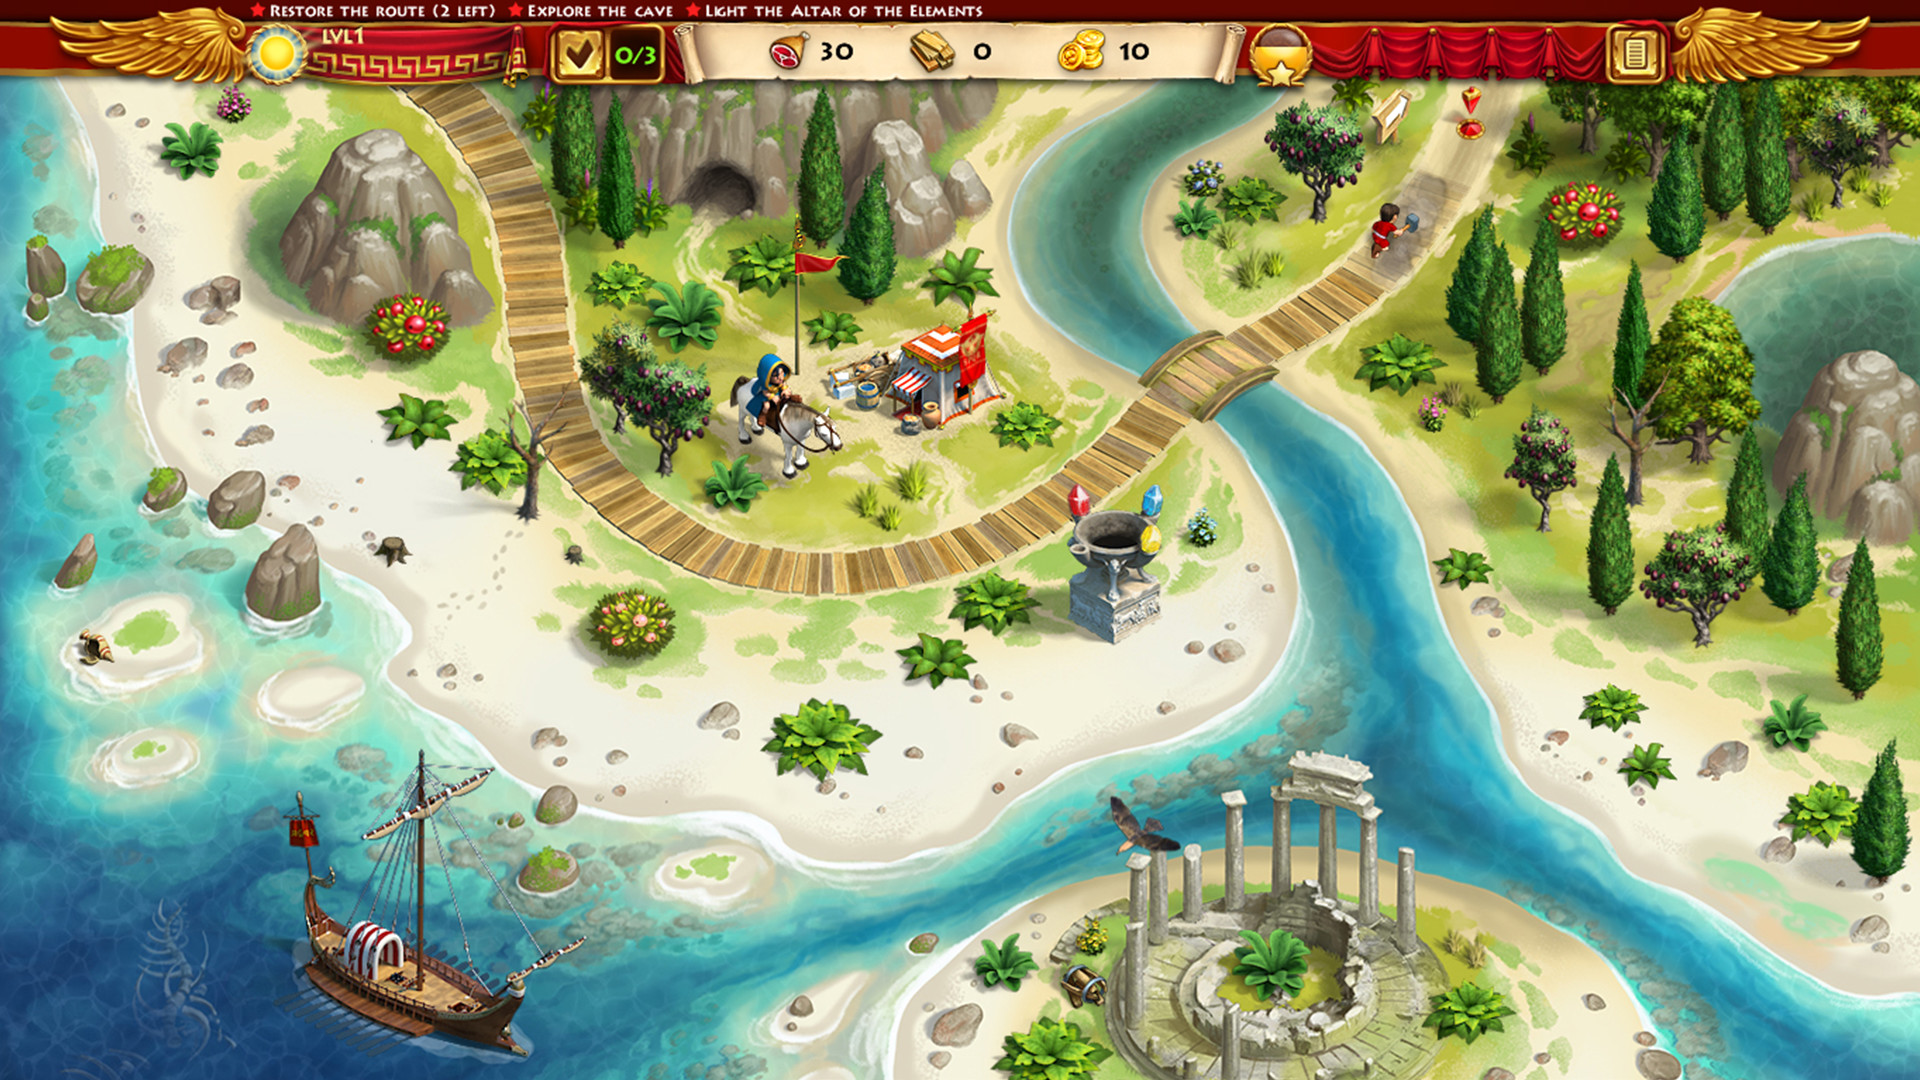 Roads of Rome: New Generation 3 Collector's Edition Free Download